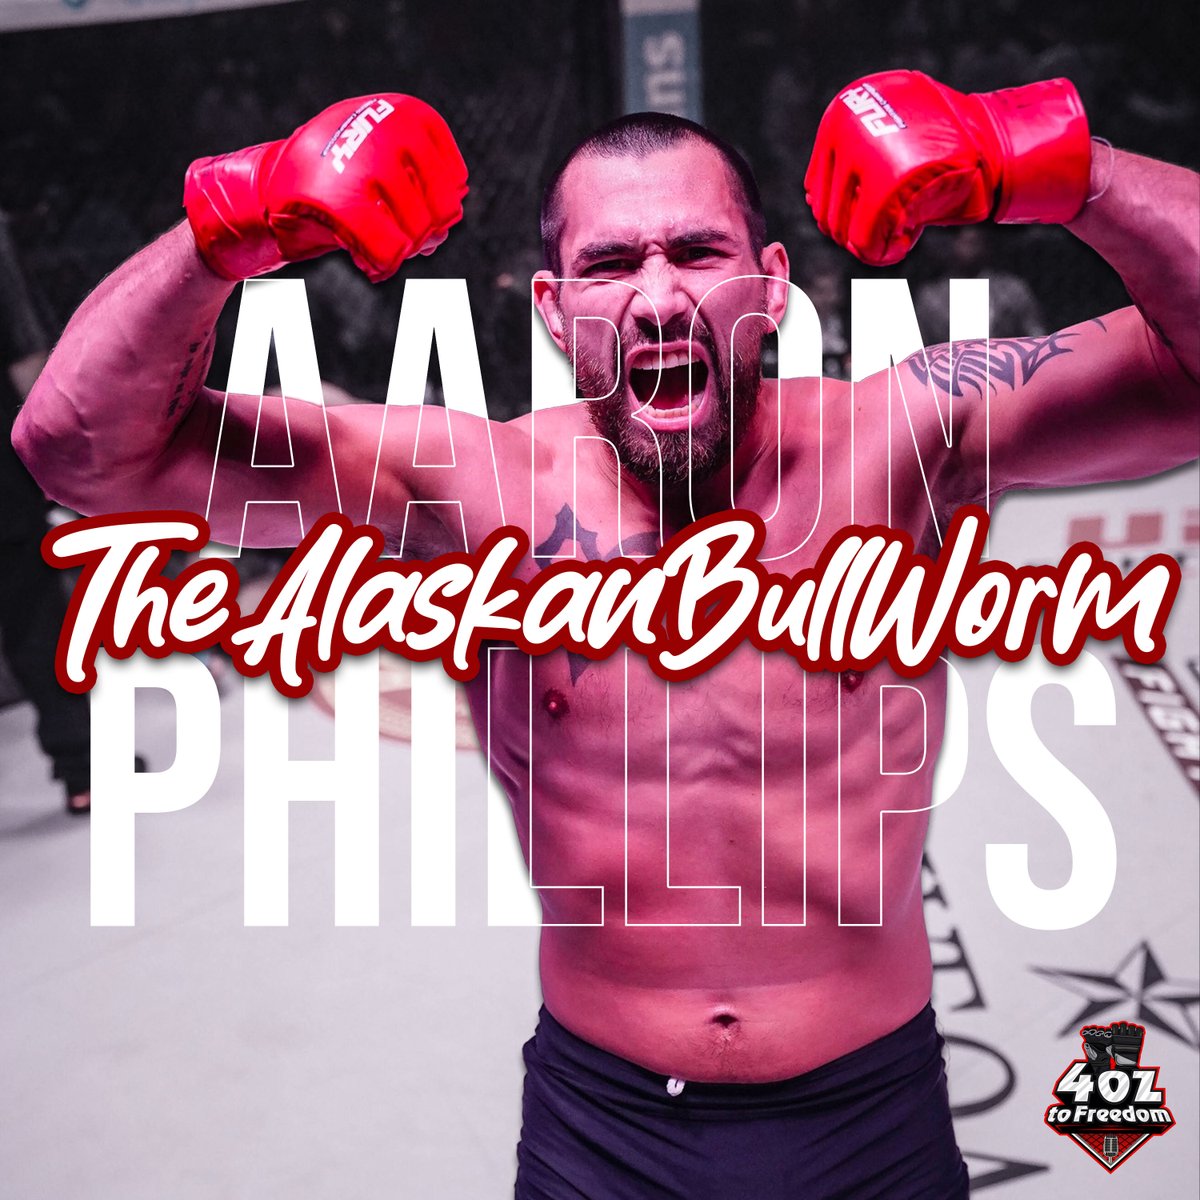 Aaron 'The Alaskan Bull Worm' Phillips, joins me ahead of his Main Event bout against Julius Holmes at #FuryFC86 on 2/23. We discuss the fight, dropping down to 170 and the success that came with it, and more!

Watch now at youtu.be/hxfamqfLaFo or listen via your podcast app.